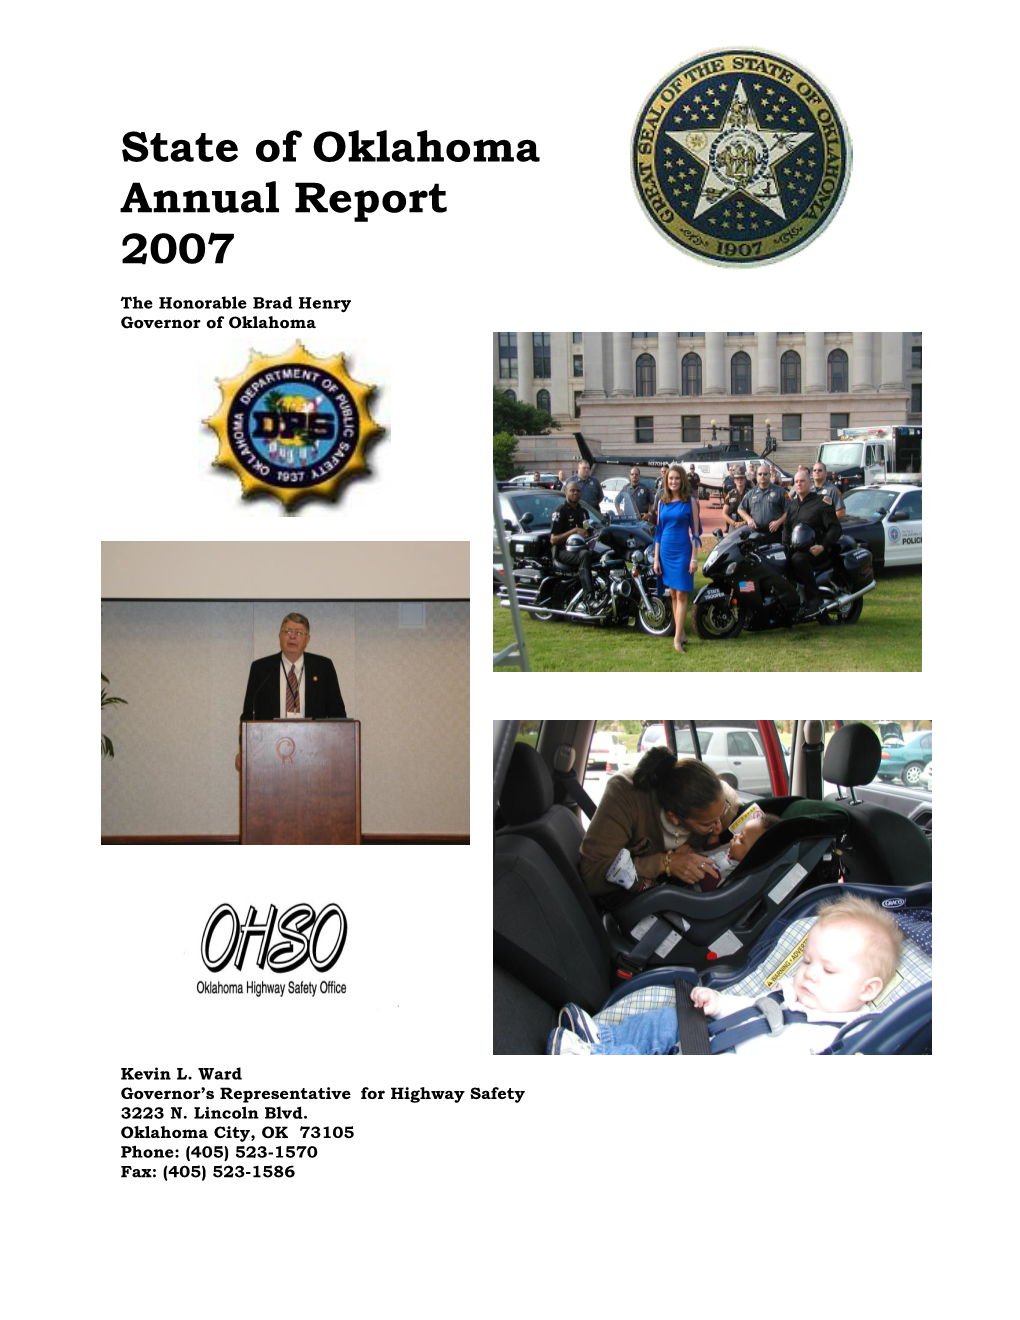 State of Oklahoma Annual Report 2007